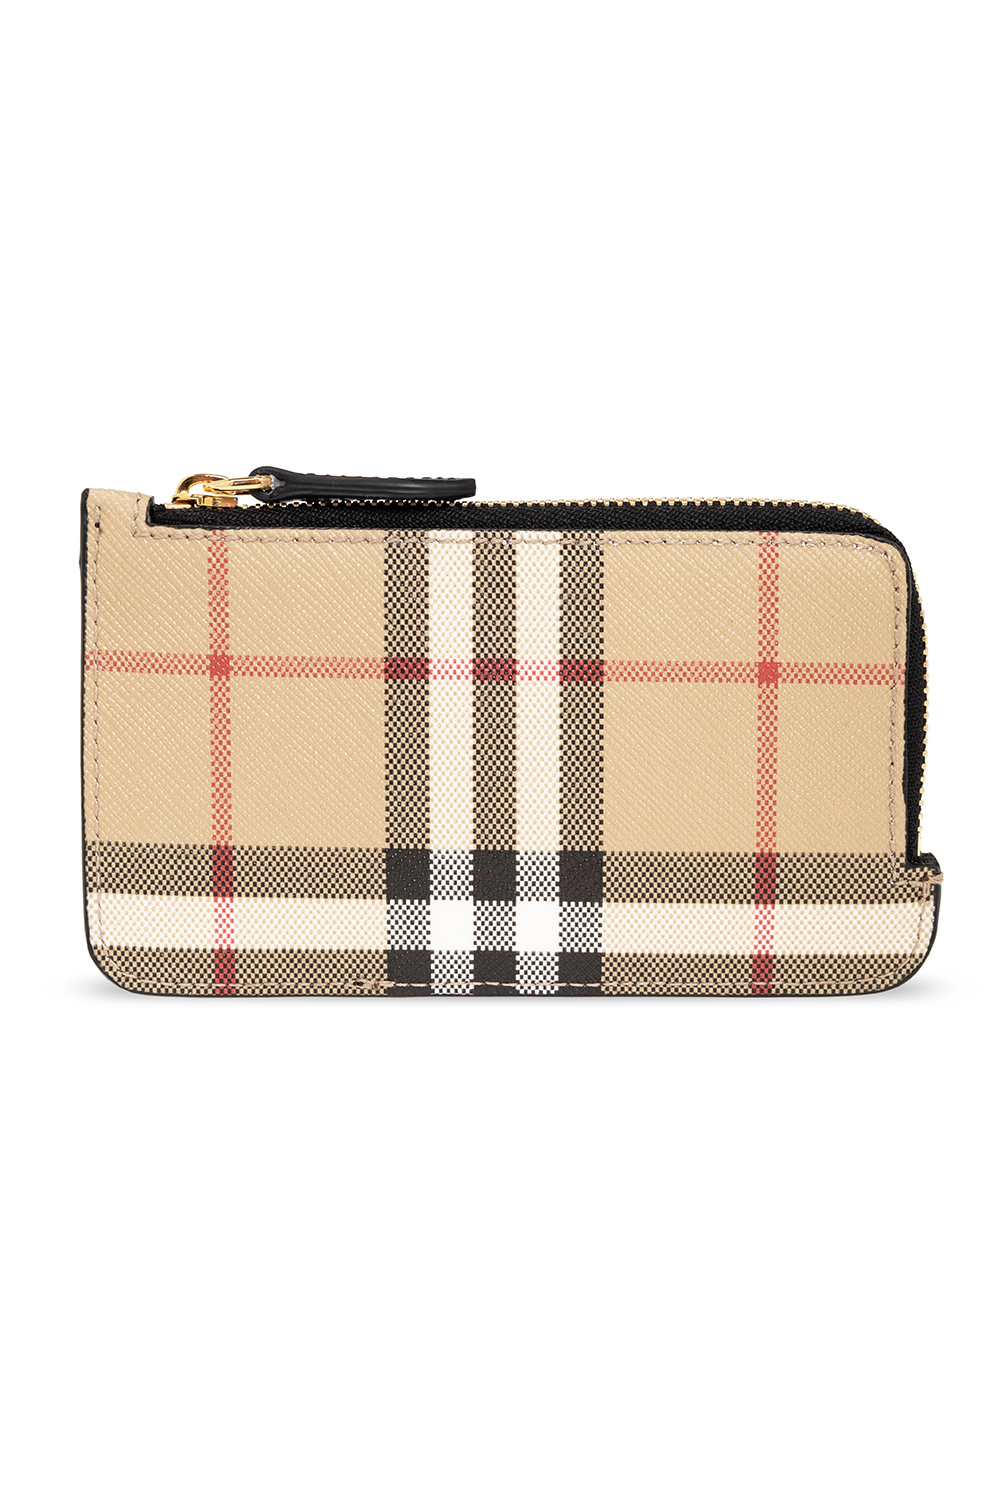 Burberry - Somerset Collection